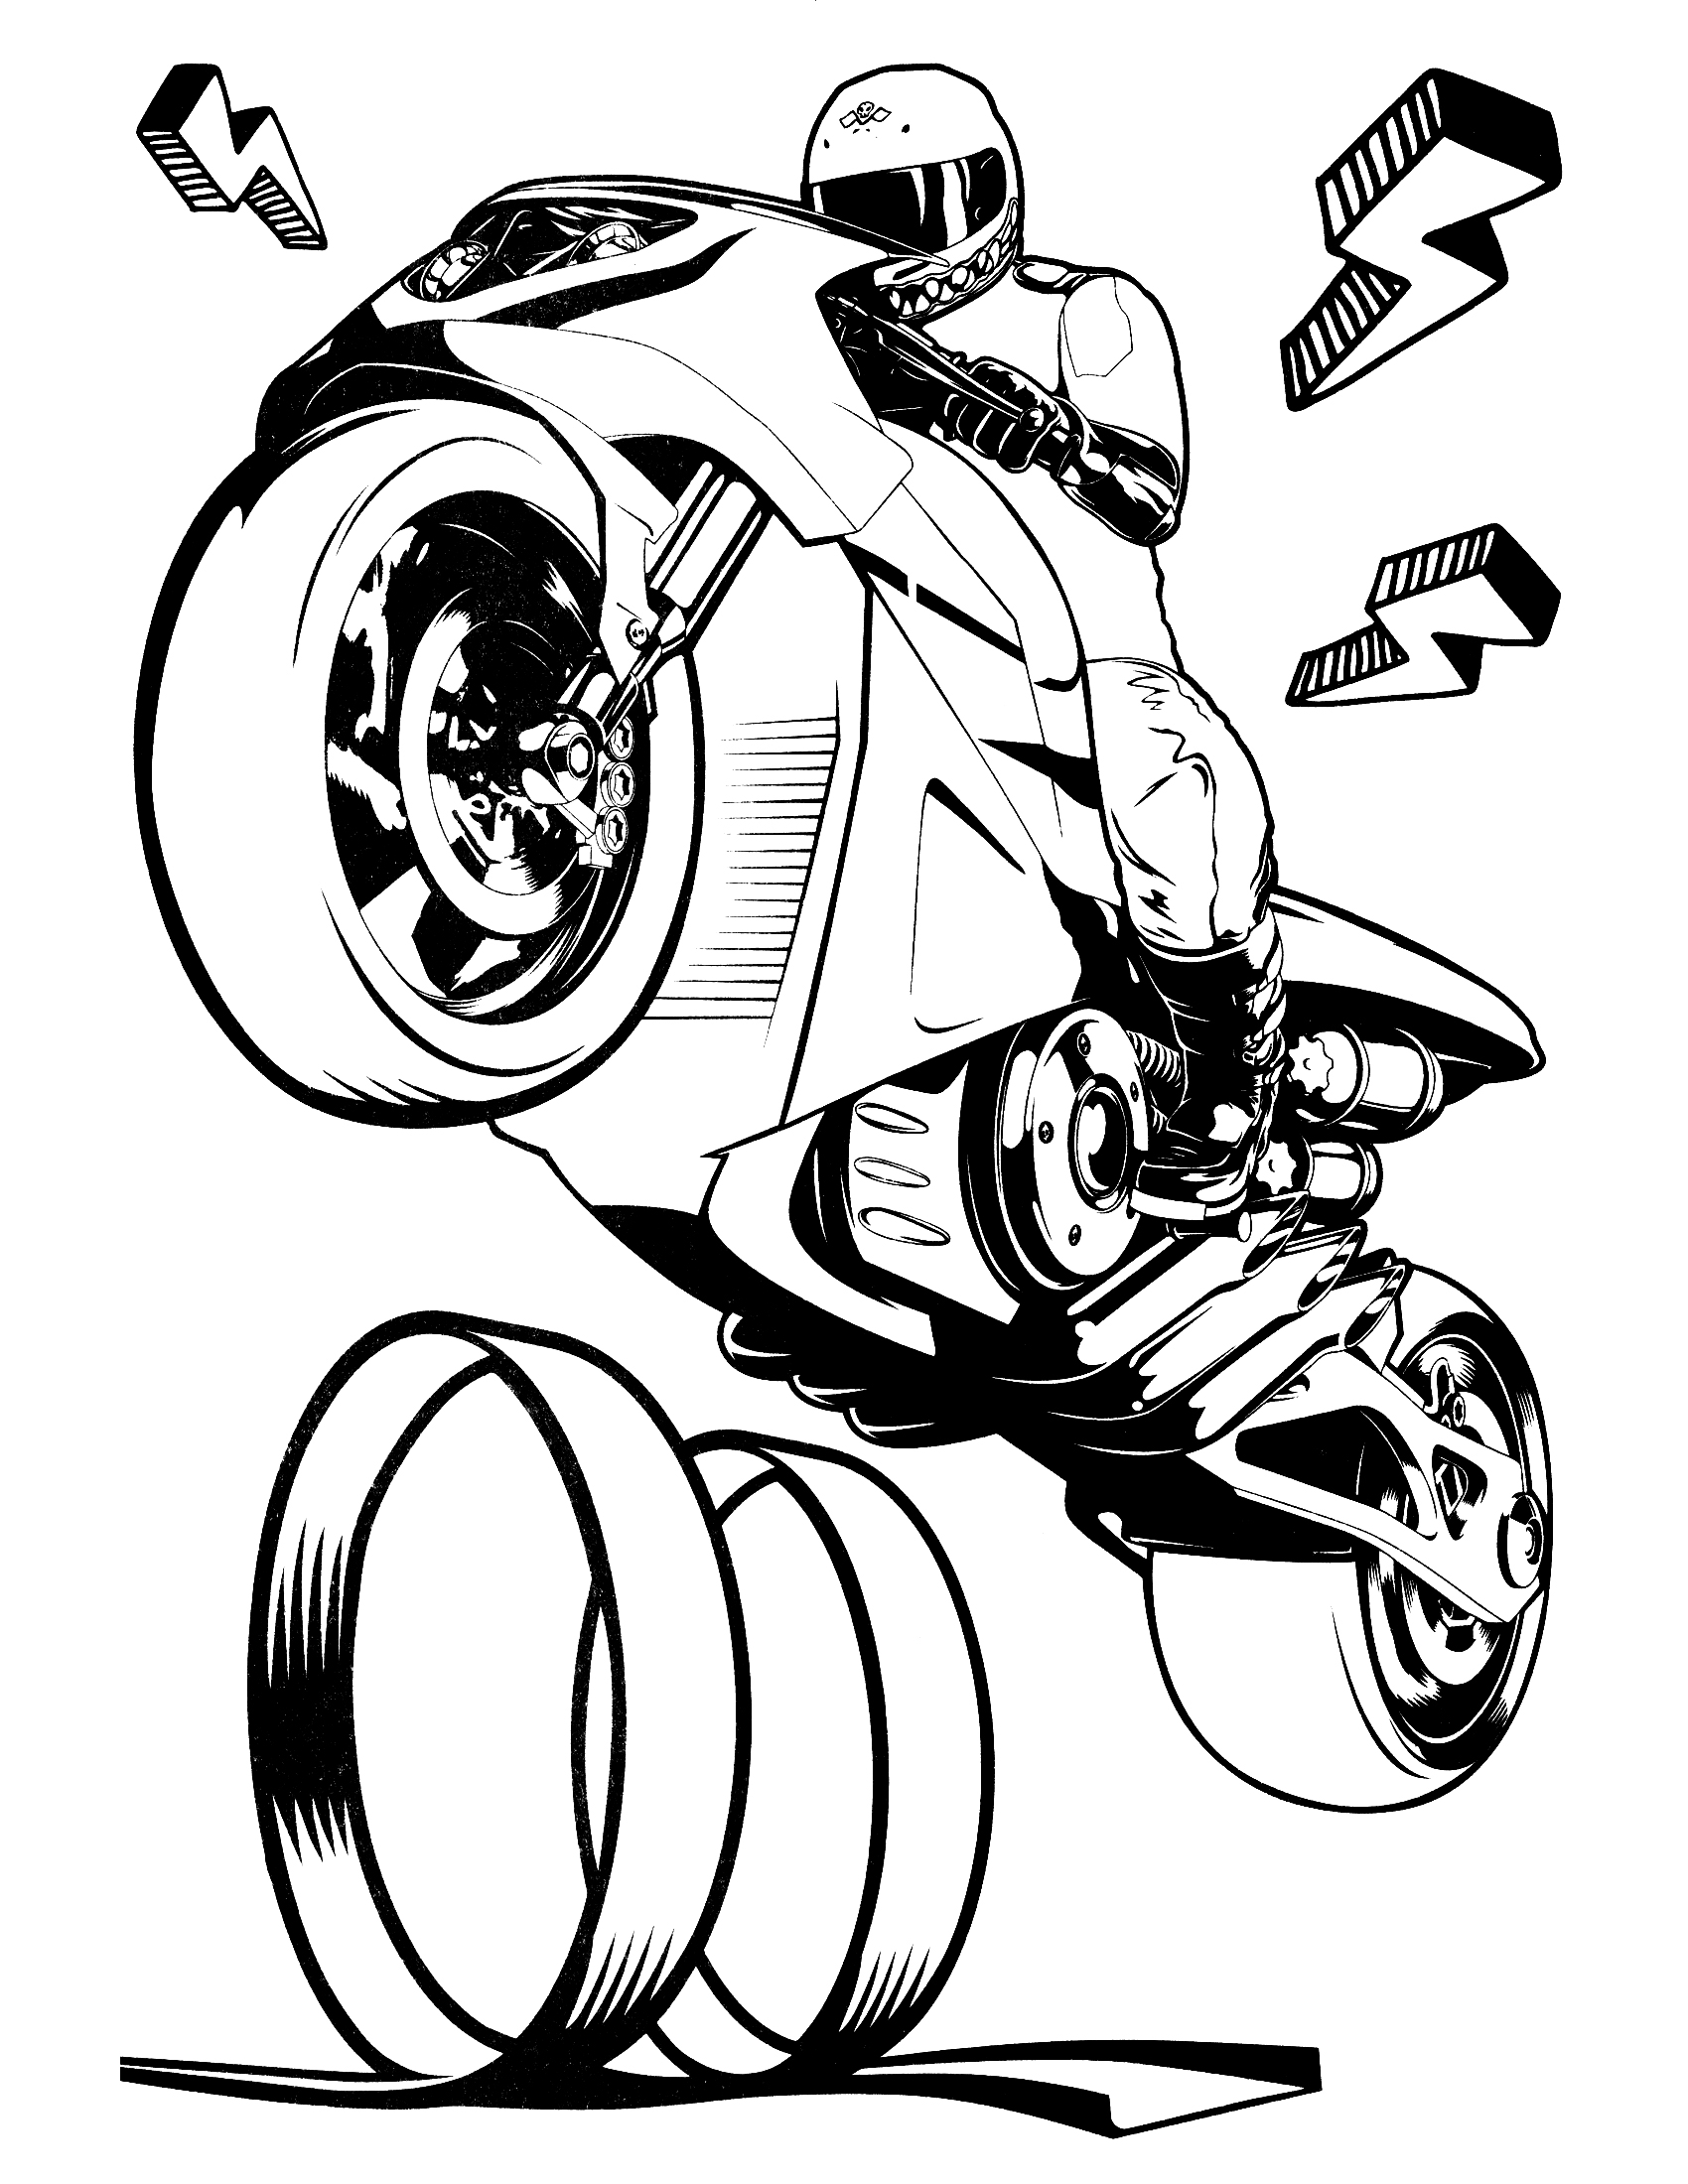 hot wheels cars pictures to color hot wheels racing league hot wheels coloring pages set 5 cars pictures wheels to hot color 